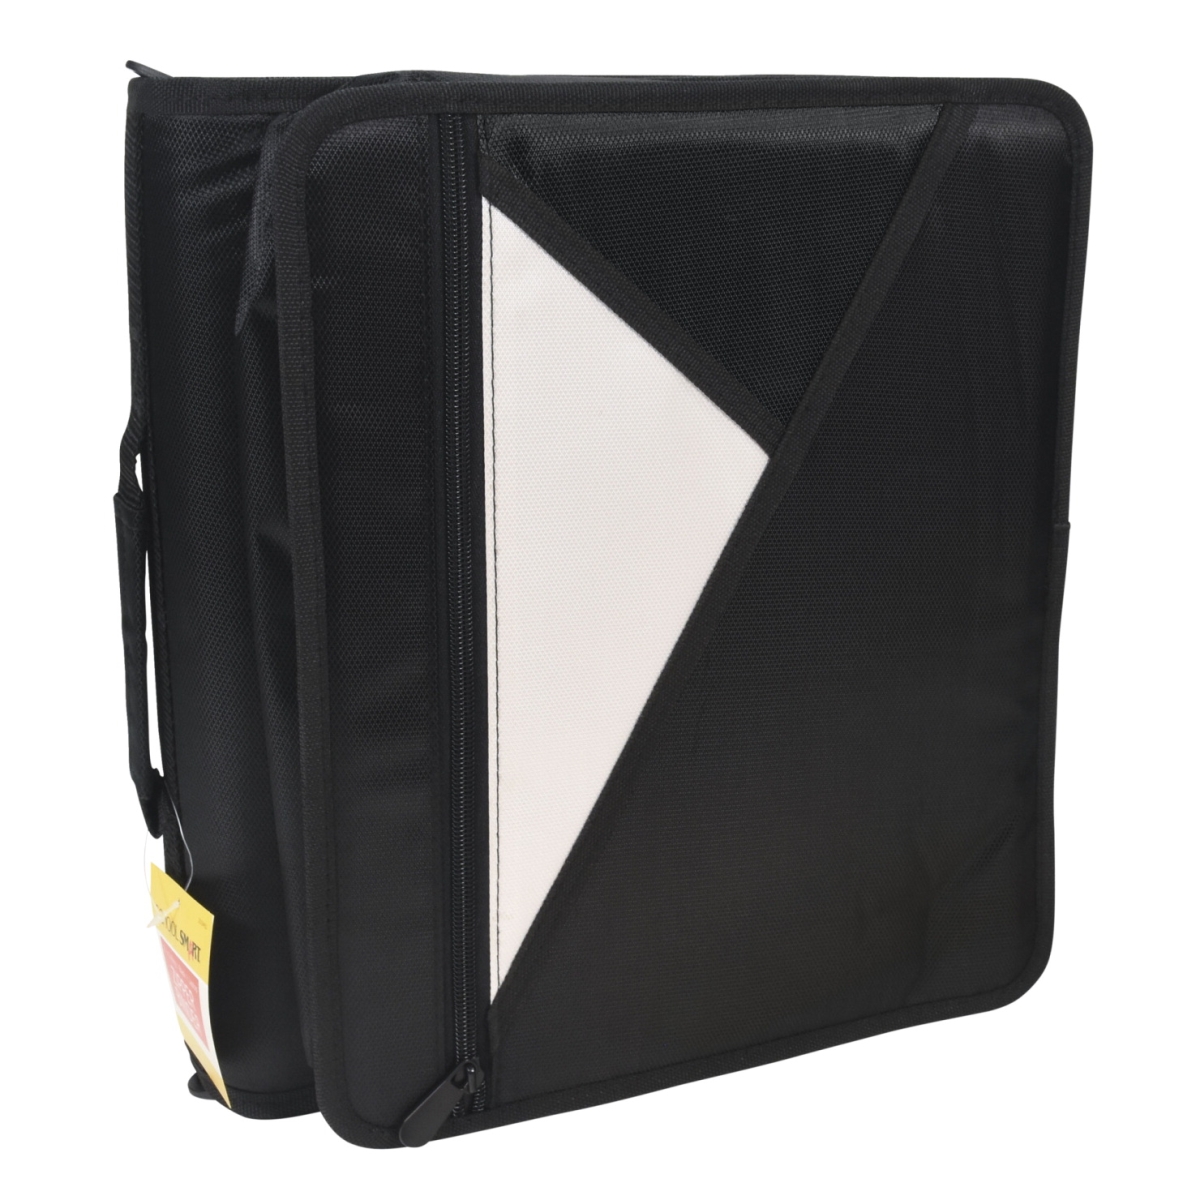 2019451 2 In. Round Ring Zipper Binder With Laptop Compartment, Black